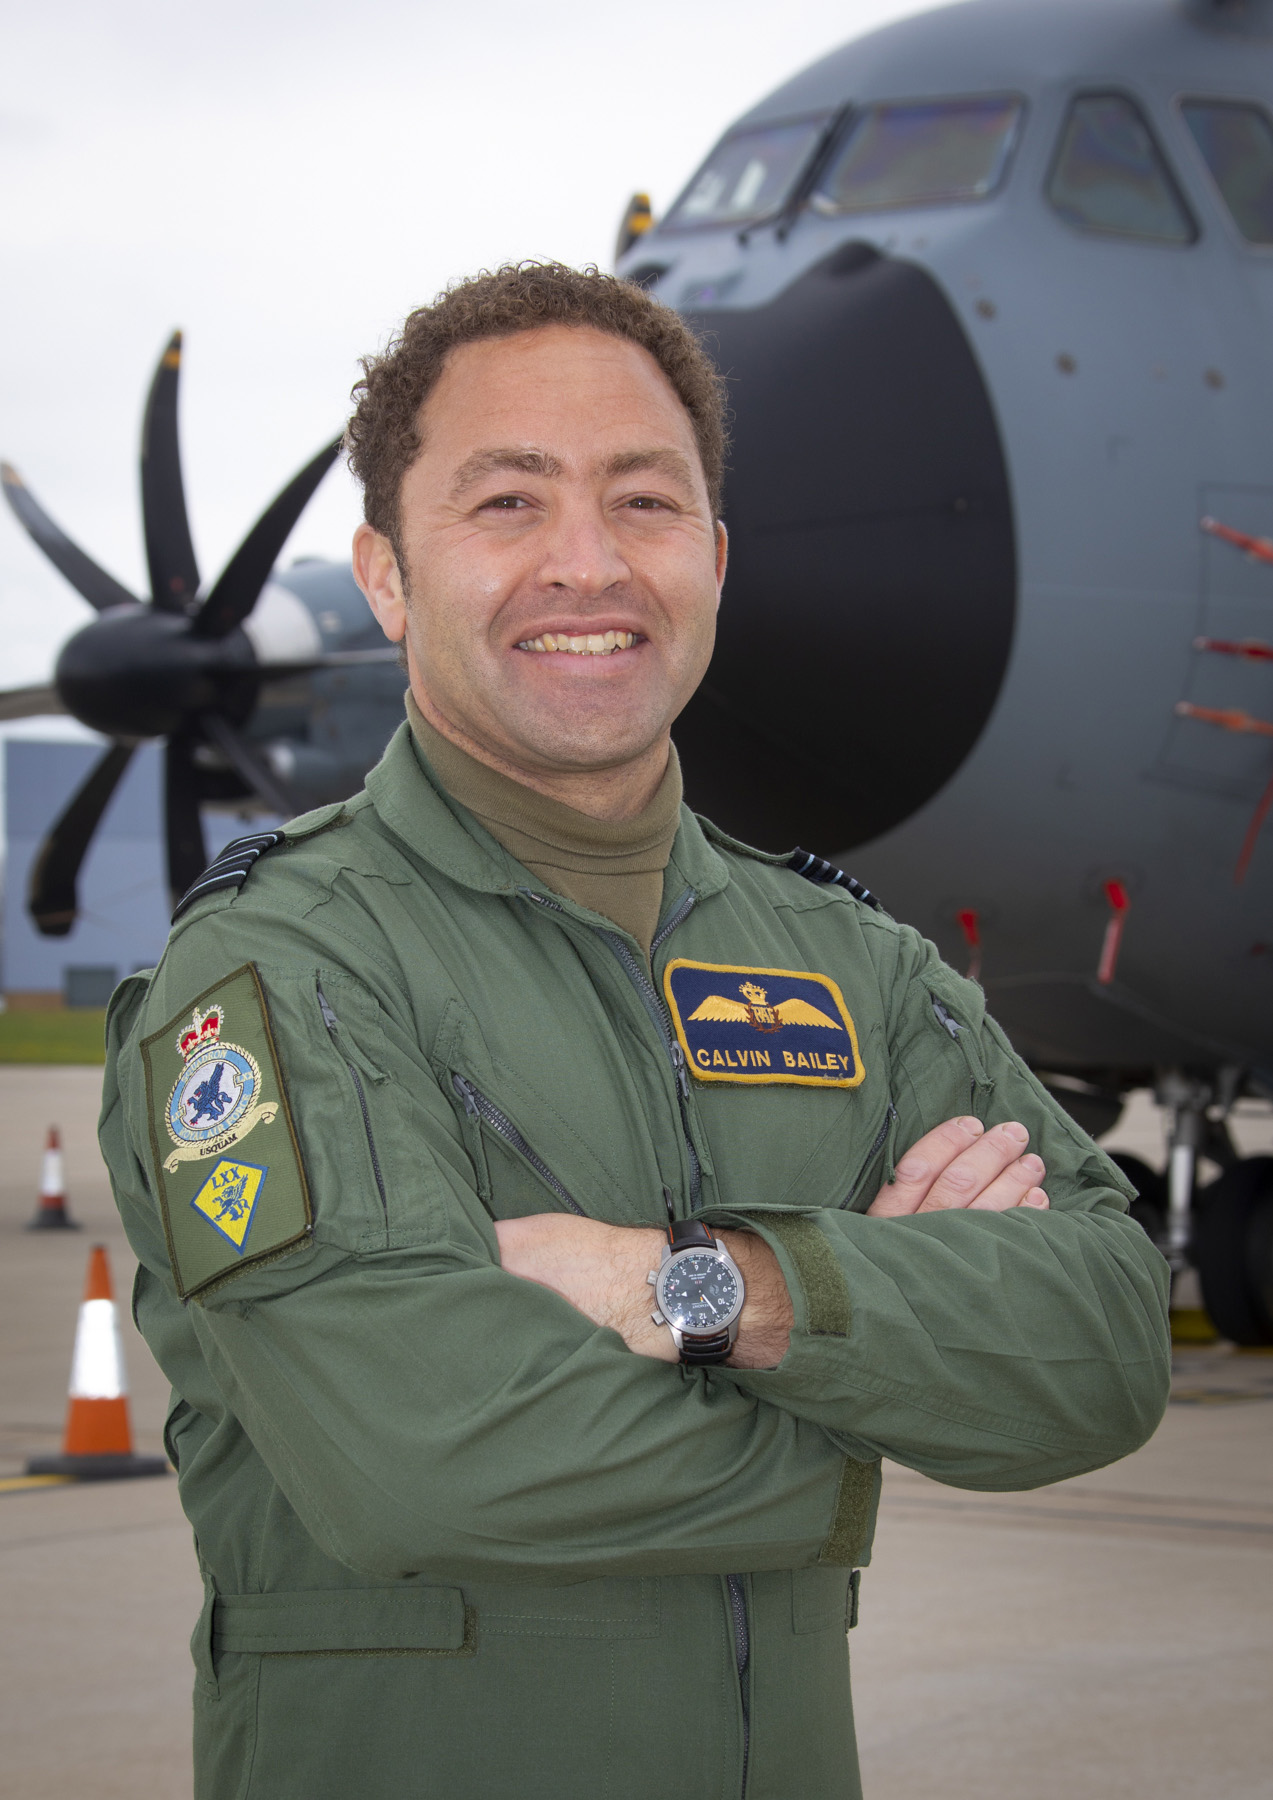 Wing Commander Calvin Bailey, Incoming Officer Commanding of LXX Squadron